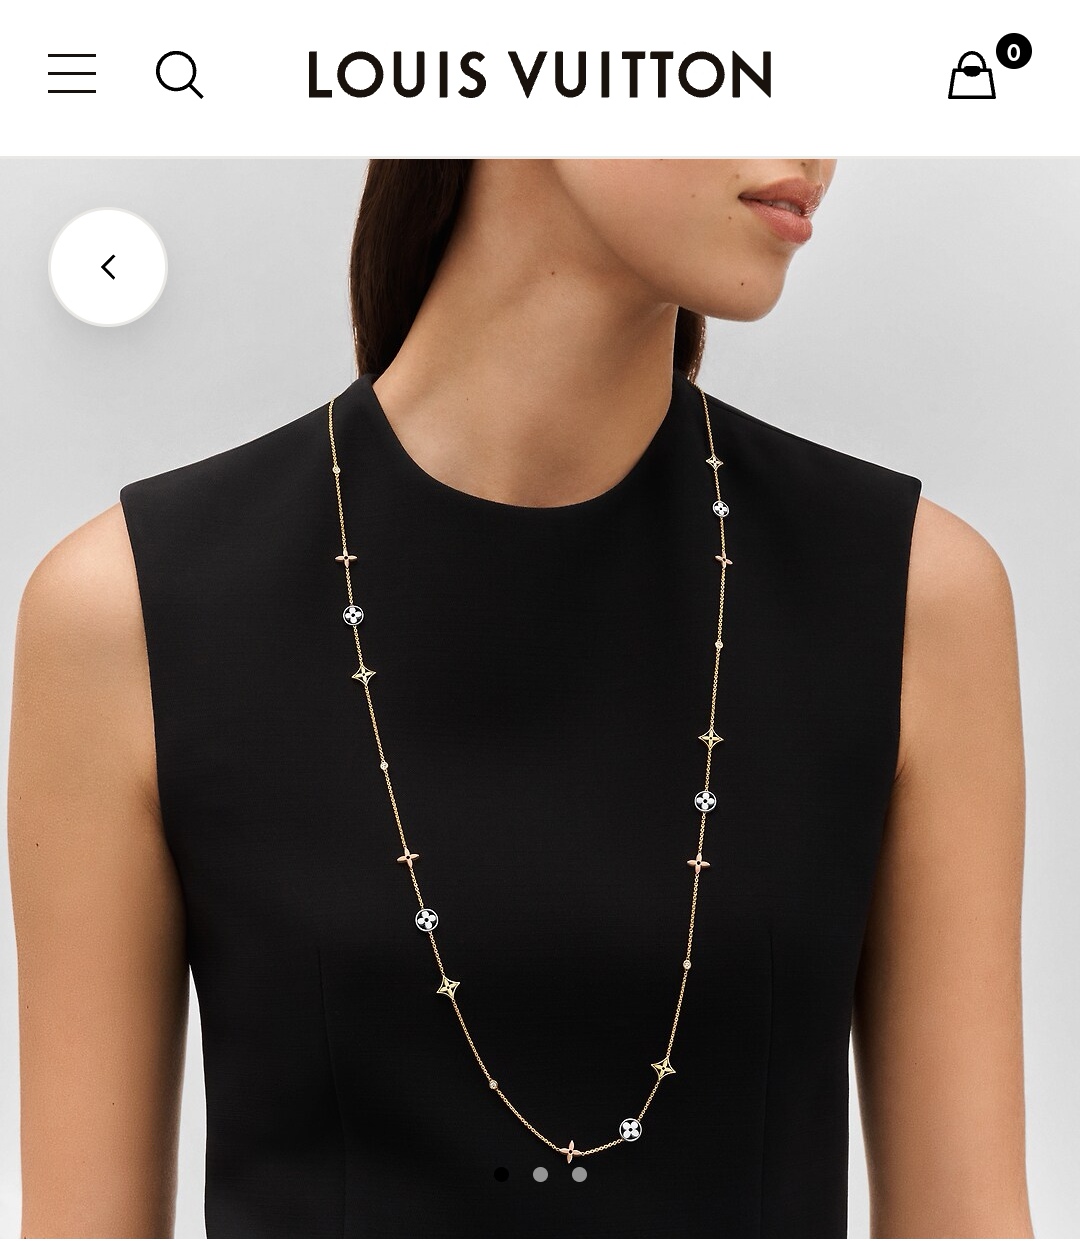 LV long necklace